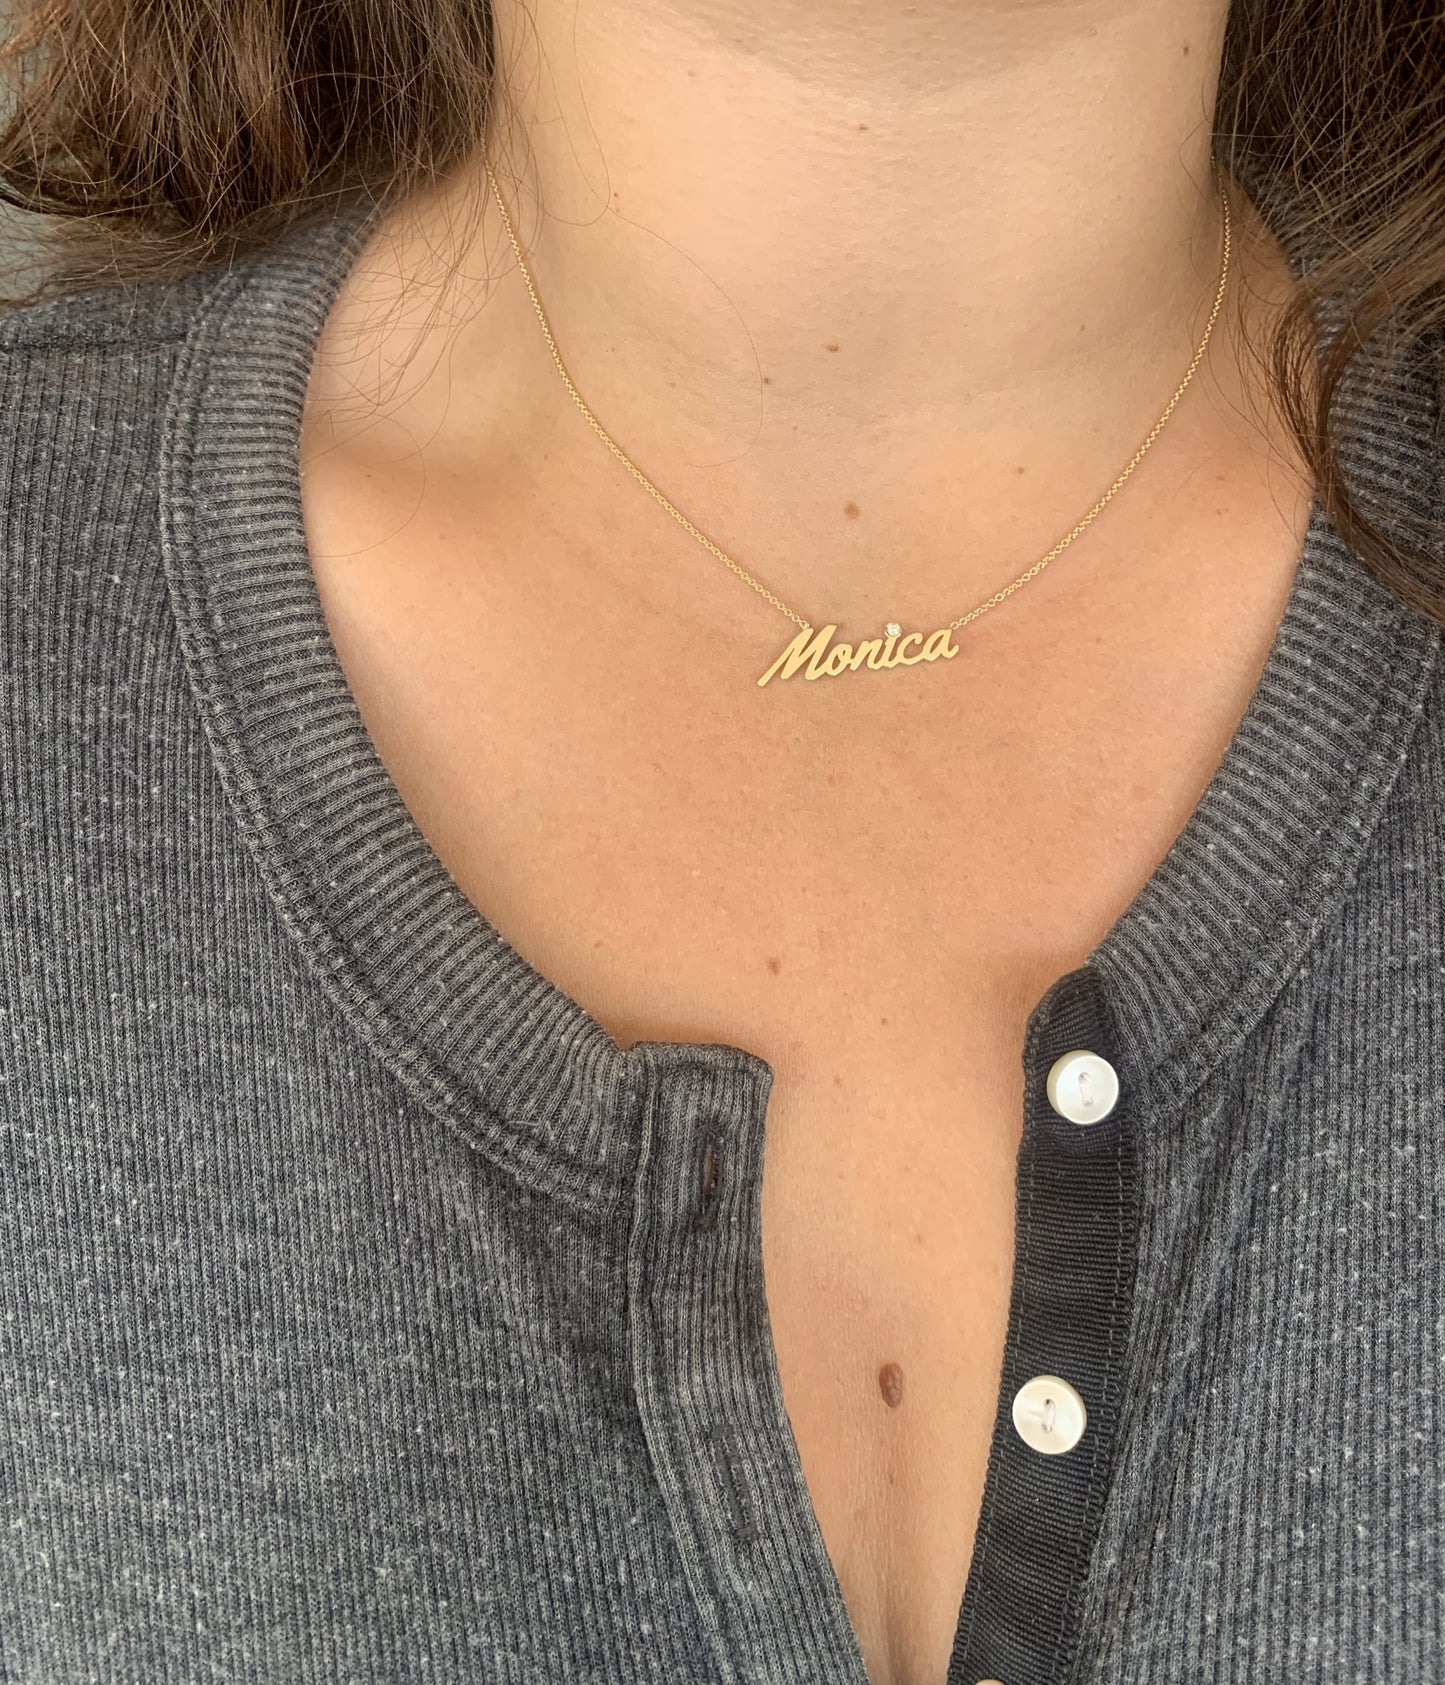 Personalized Name Necklace with Diamond Accent